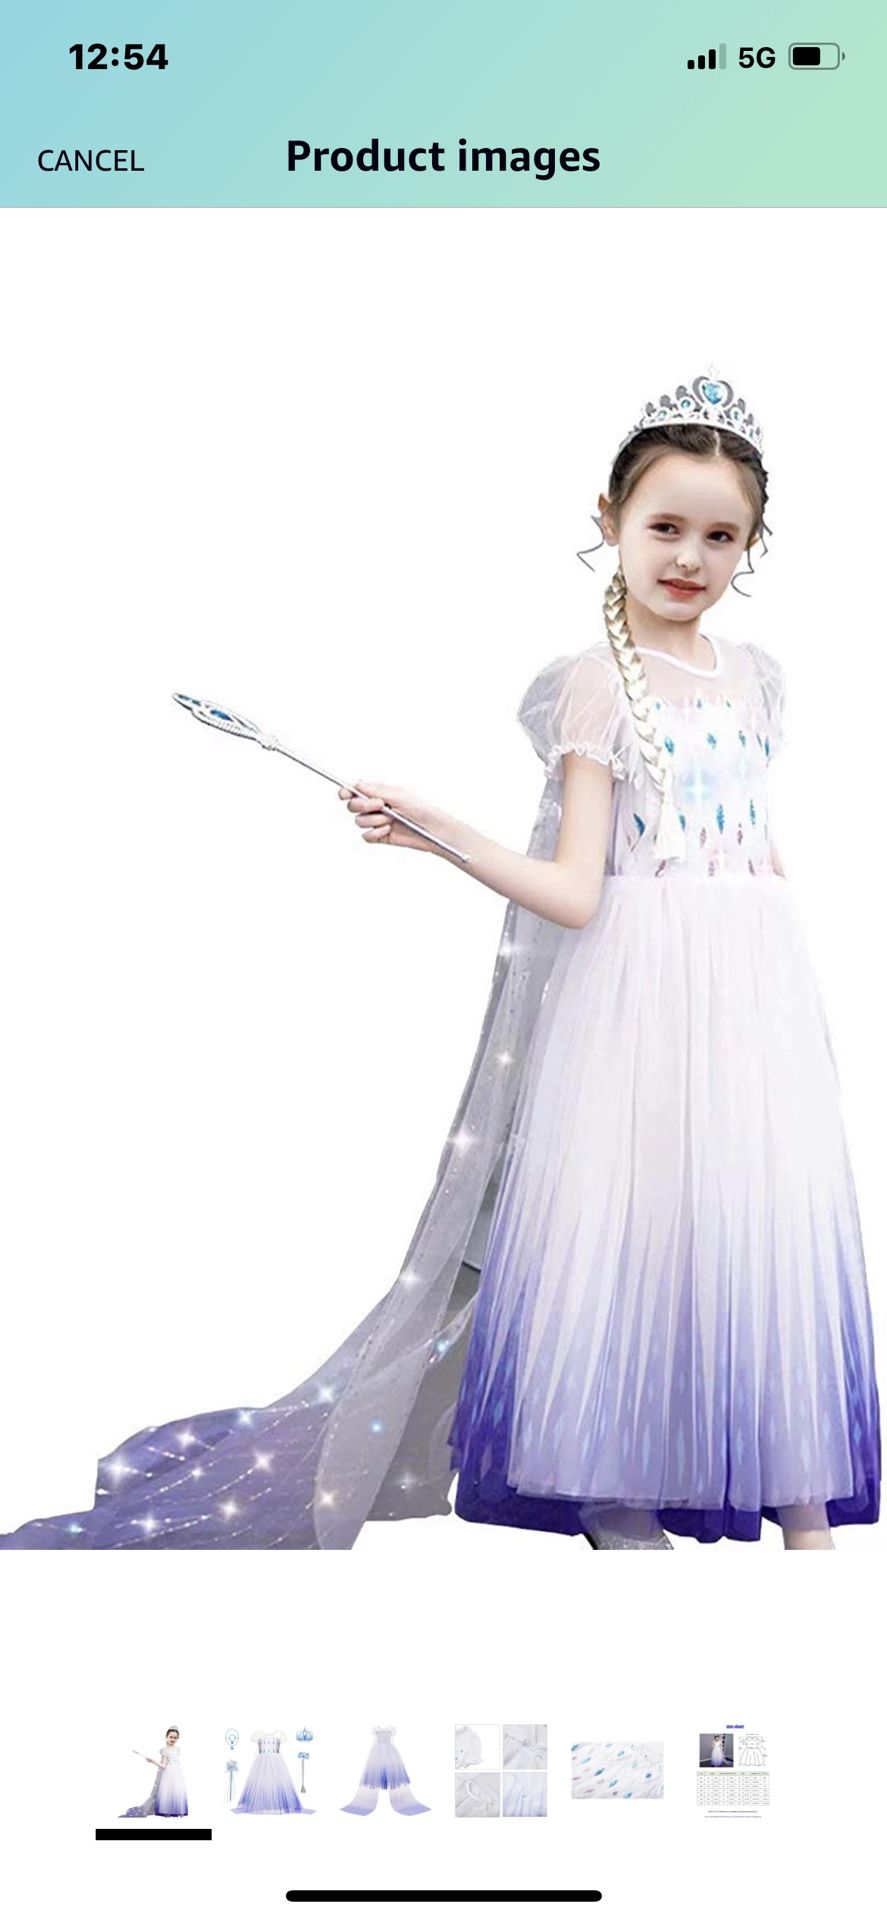 Frozen 2 inspired Tulle Elsa Short Sleeve Dress Costume with Tiara wand 5-6T